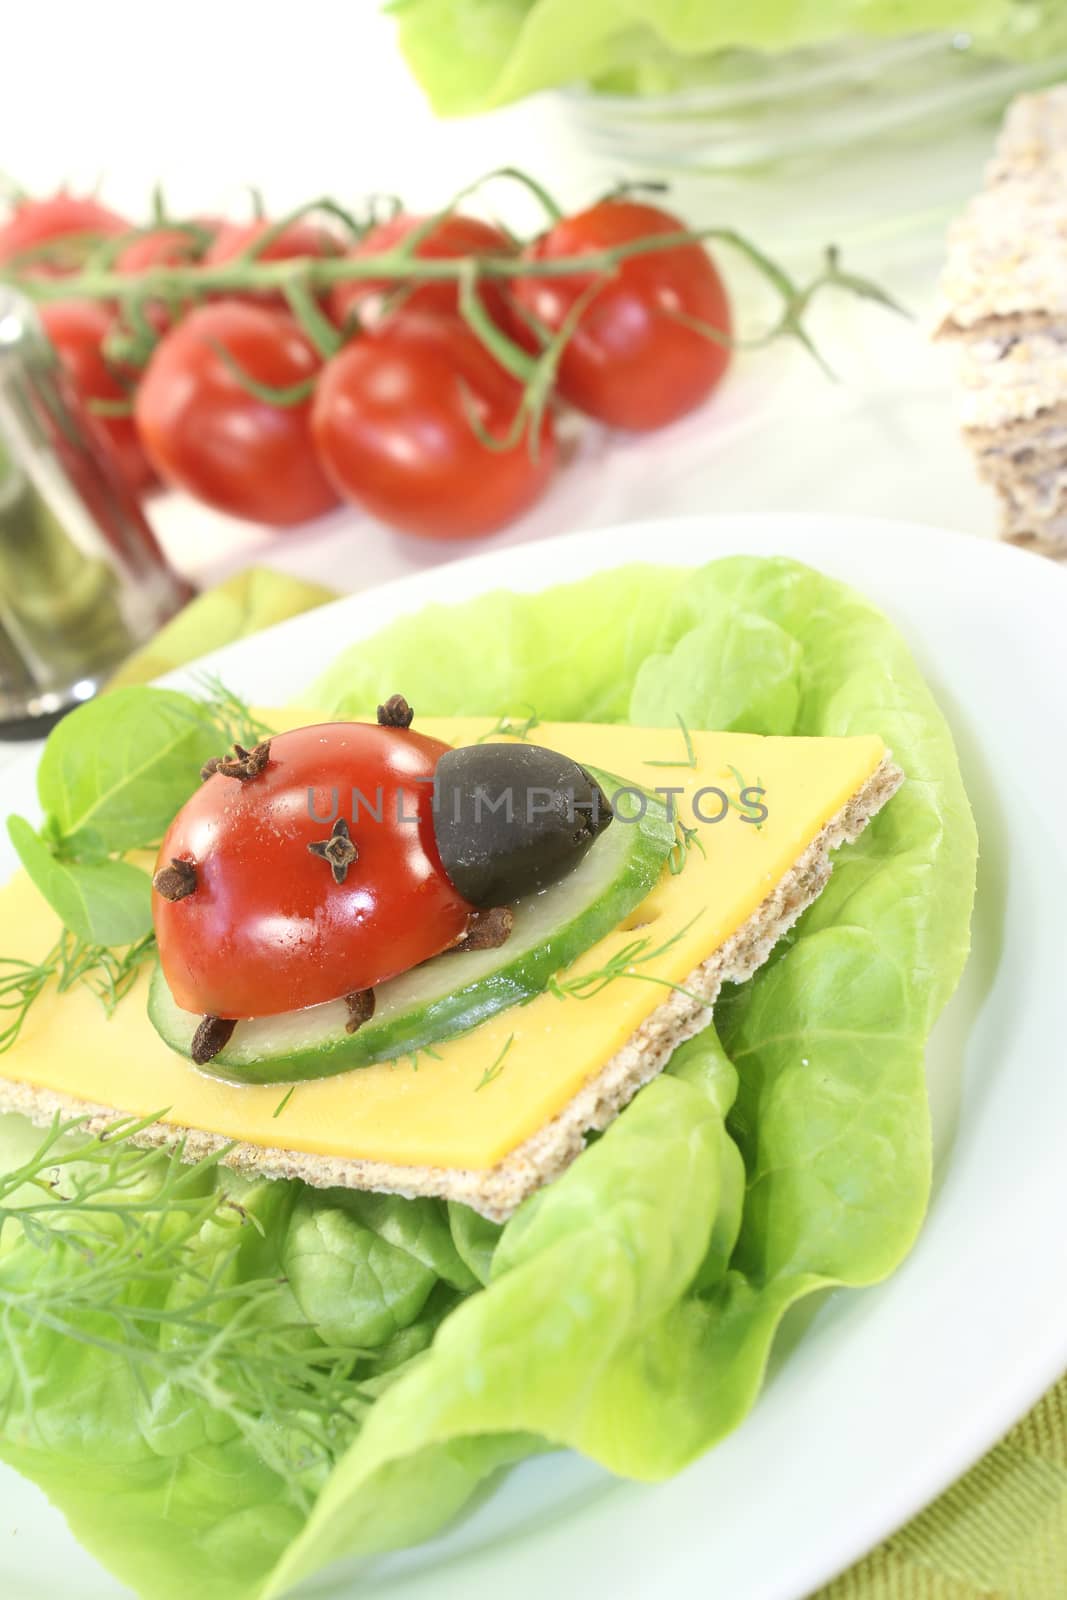 Crispbread with cheese, dill and ladybug on a light background